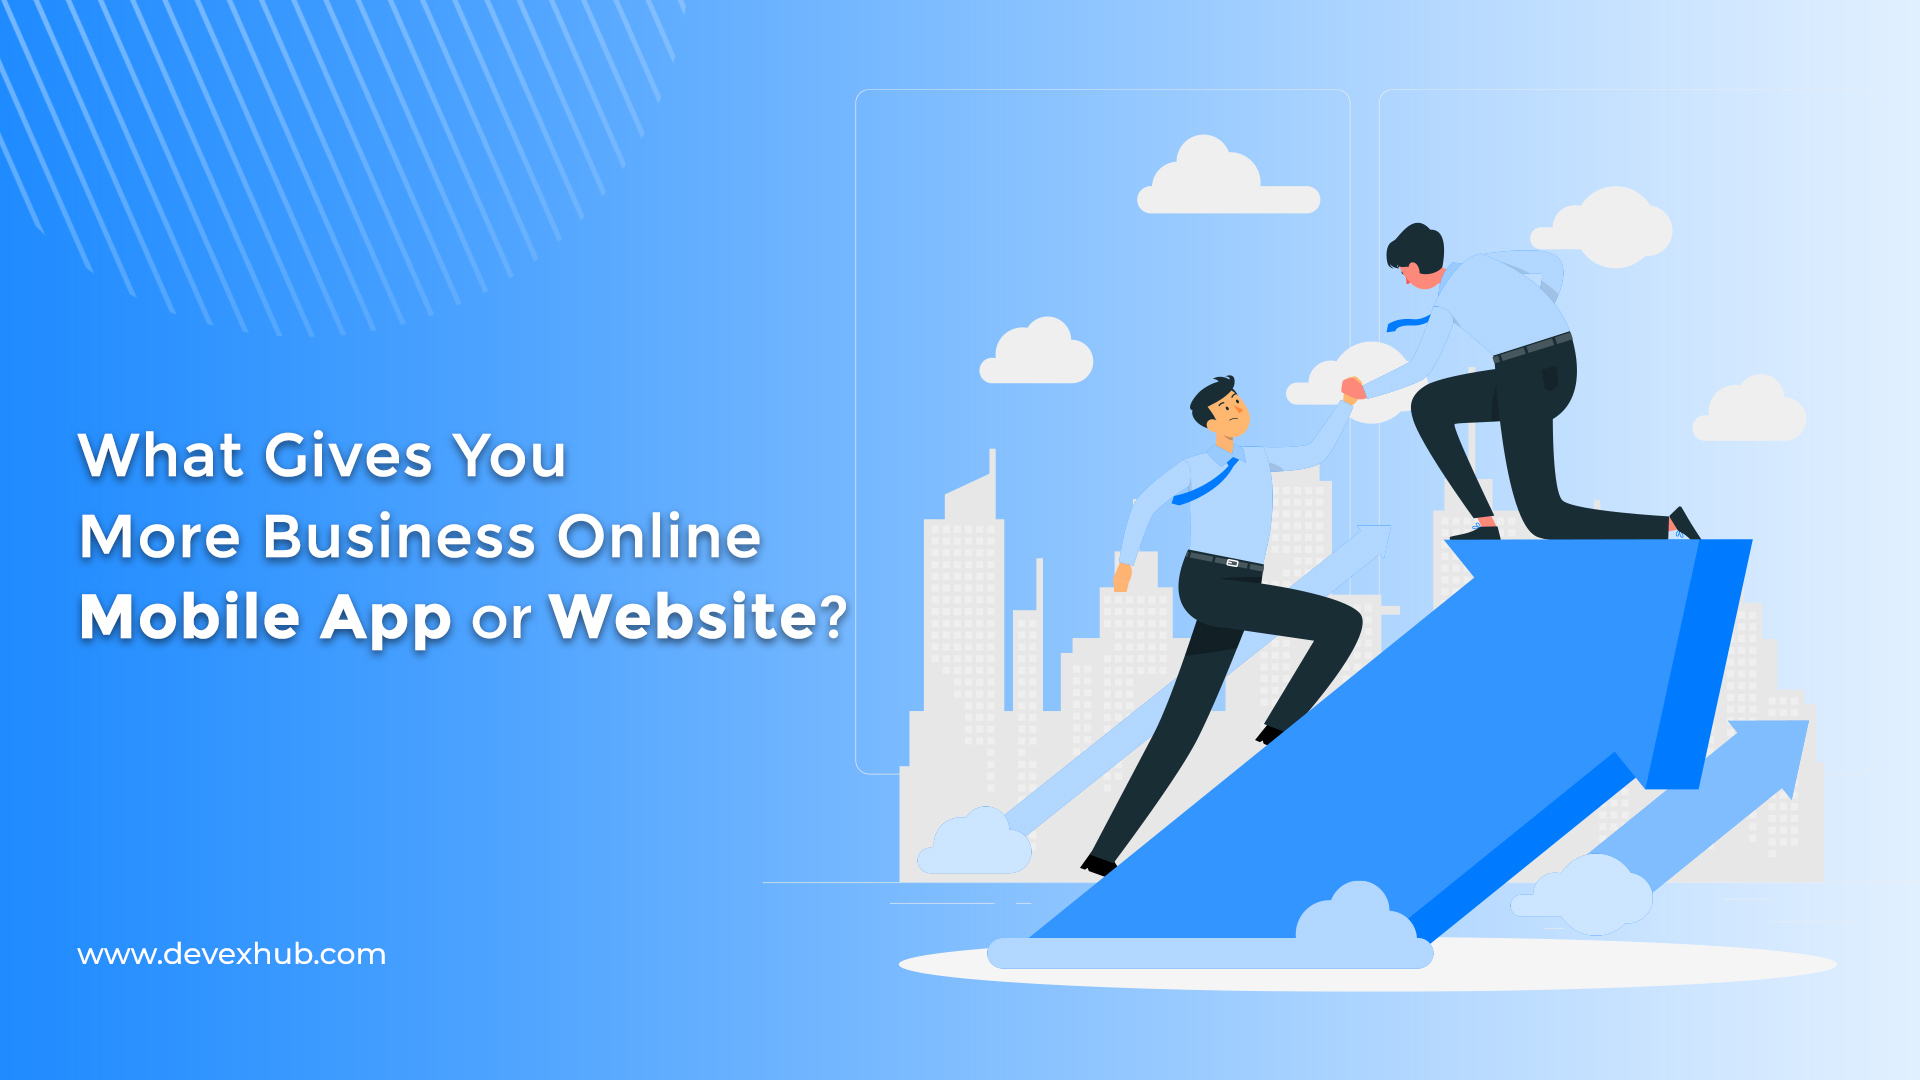 What Gives You More Business Online: Mobile App or Website?